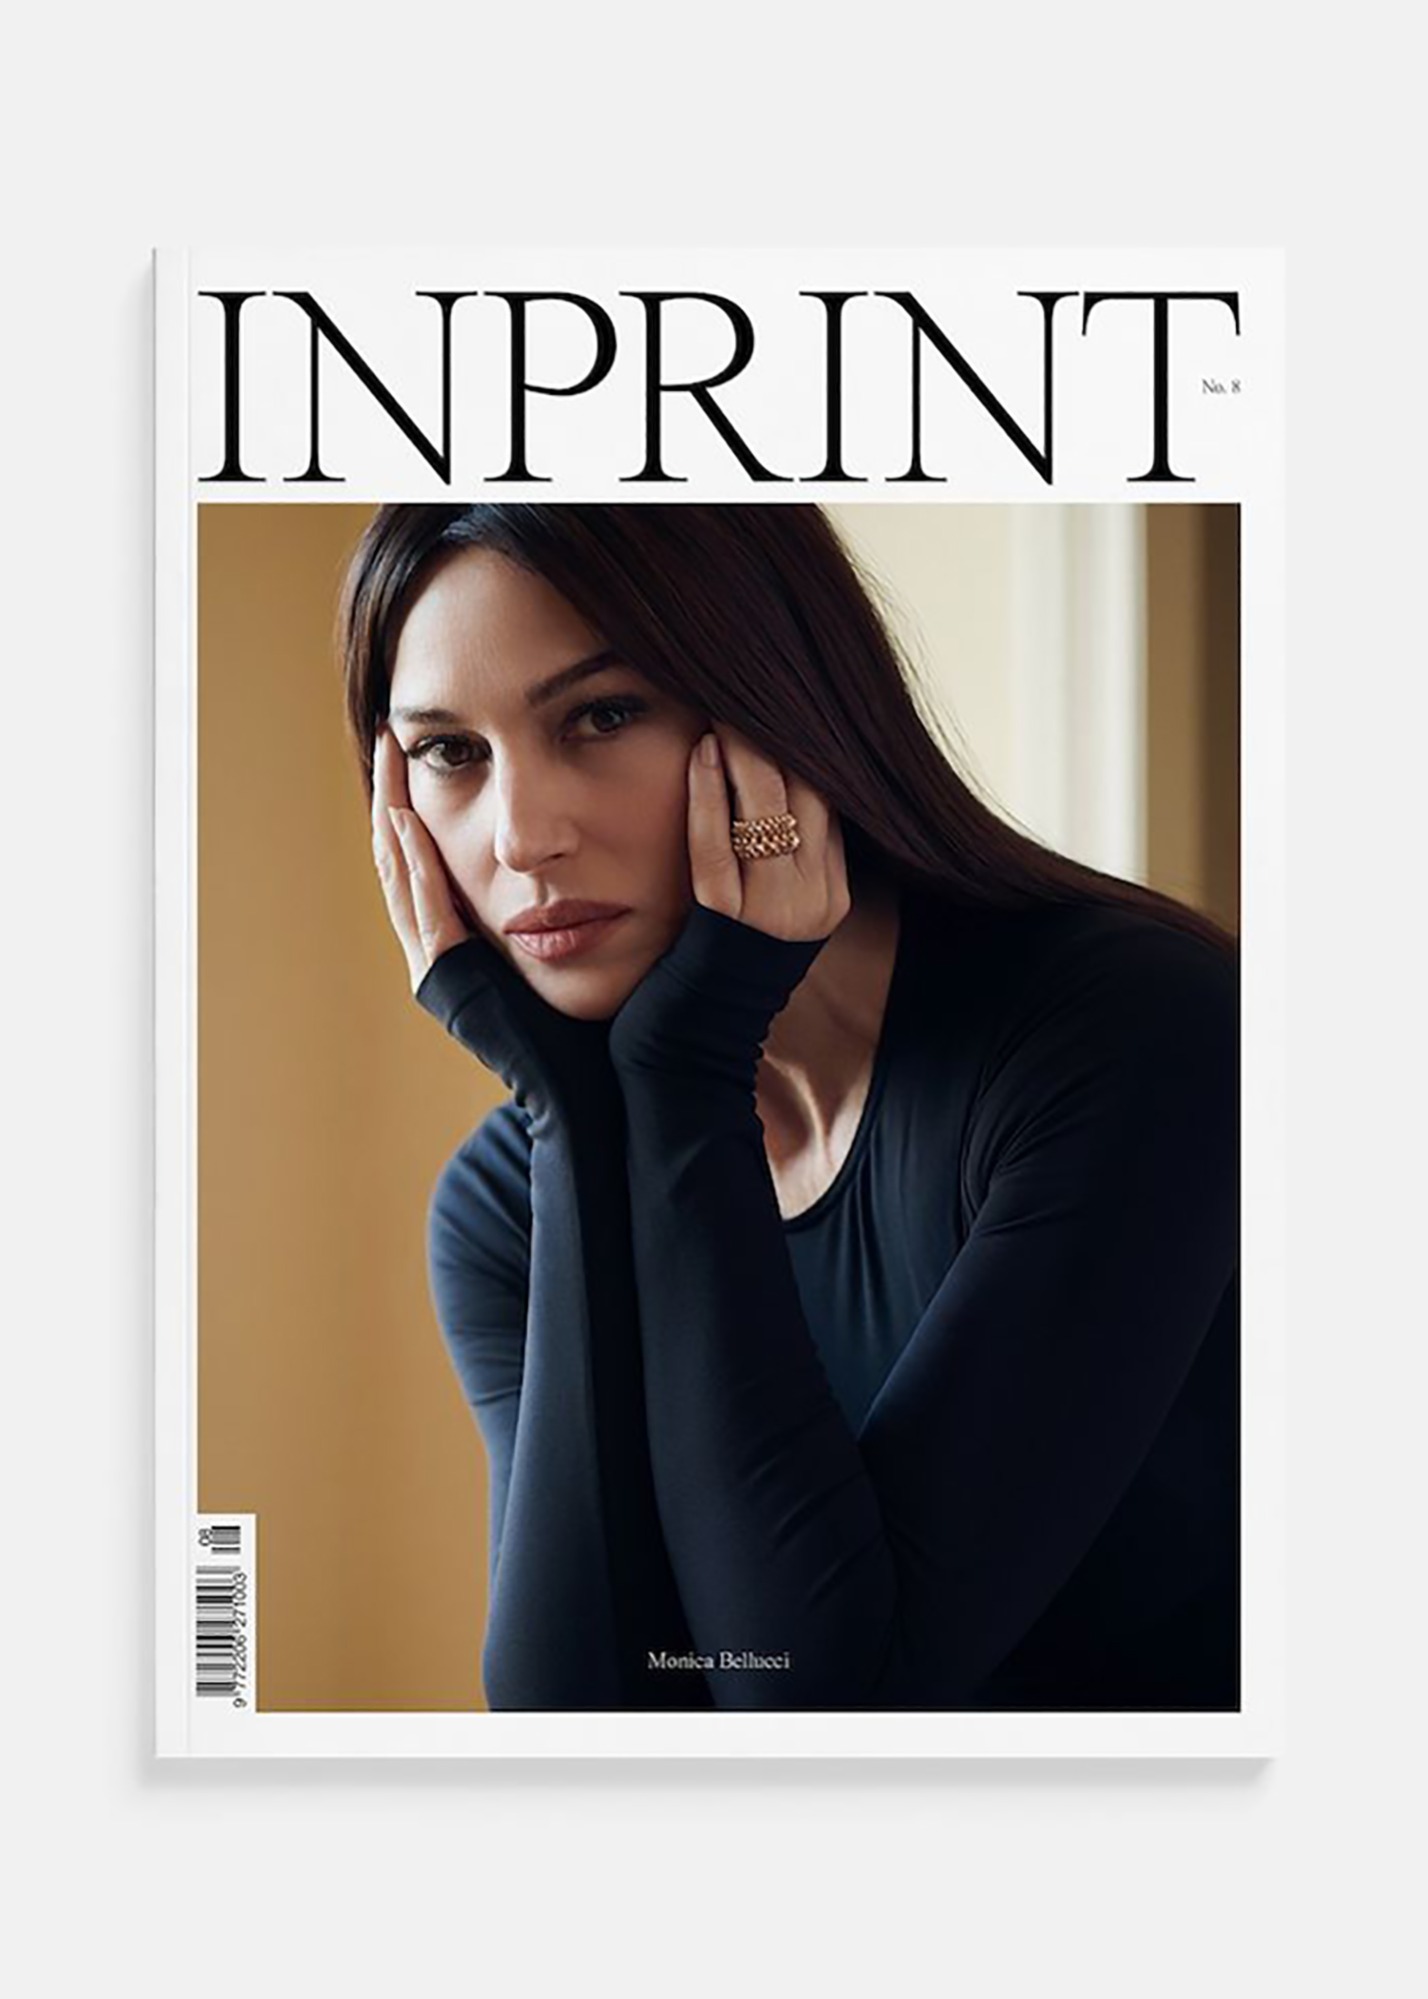 INPRINT Issue 8